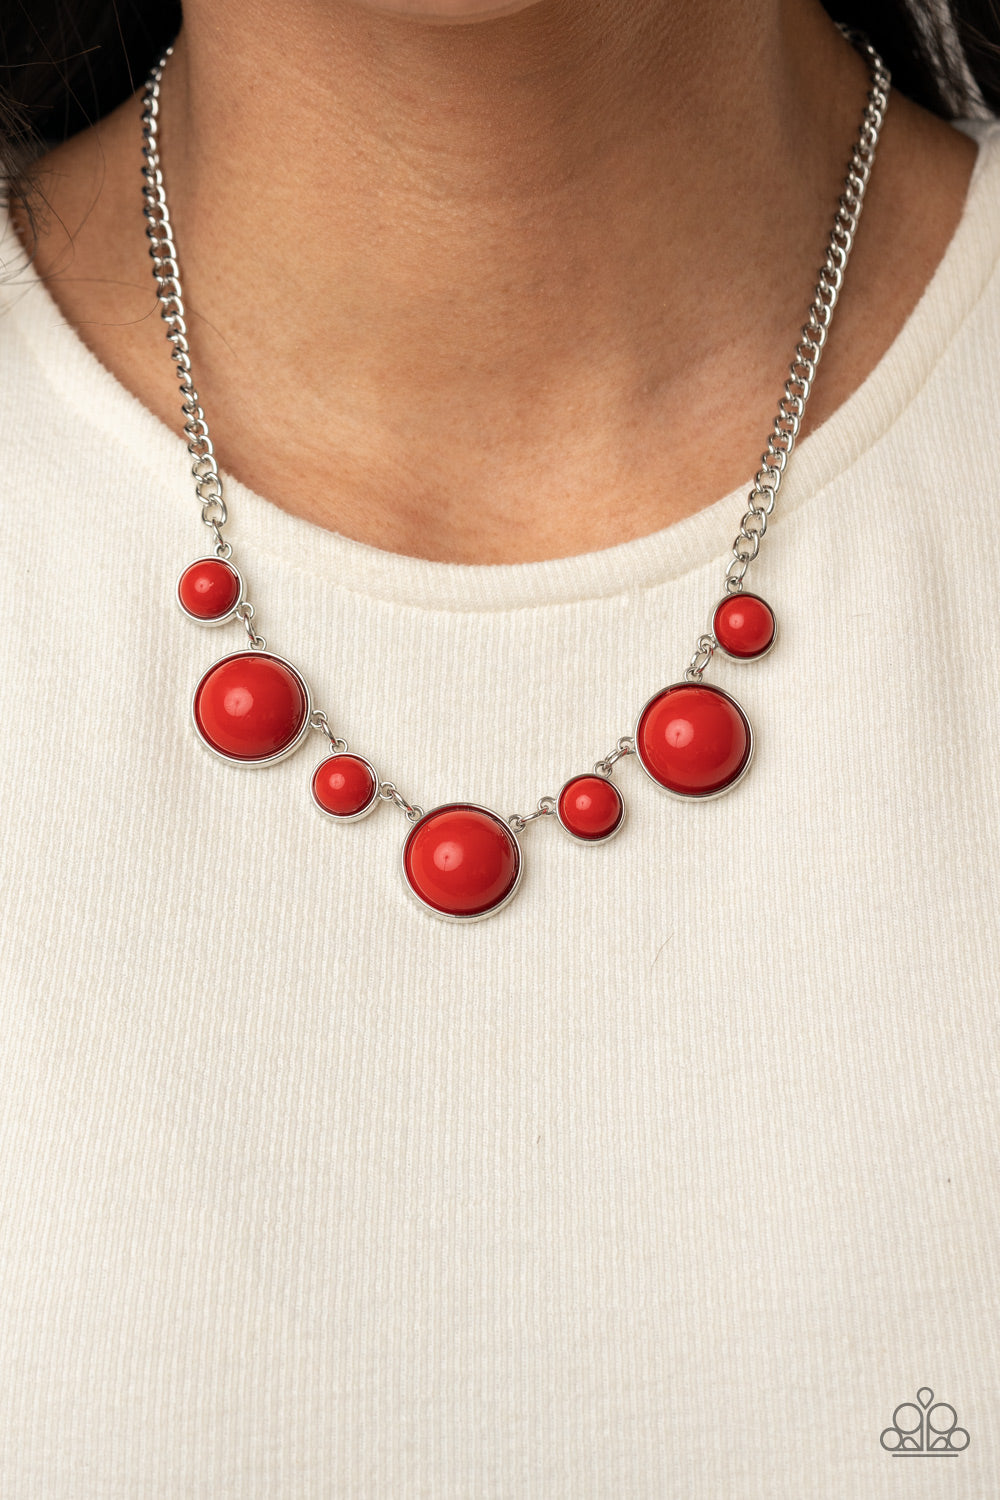 PRE-ORDER - Paparazzi Prismatically POP-tastic - Red - Necklace & Earrings - $5 Jewelry with Ashley Swint